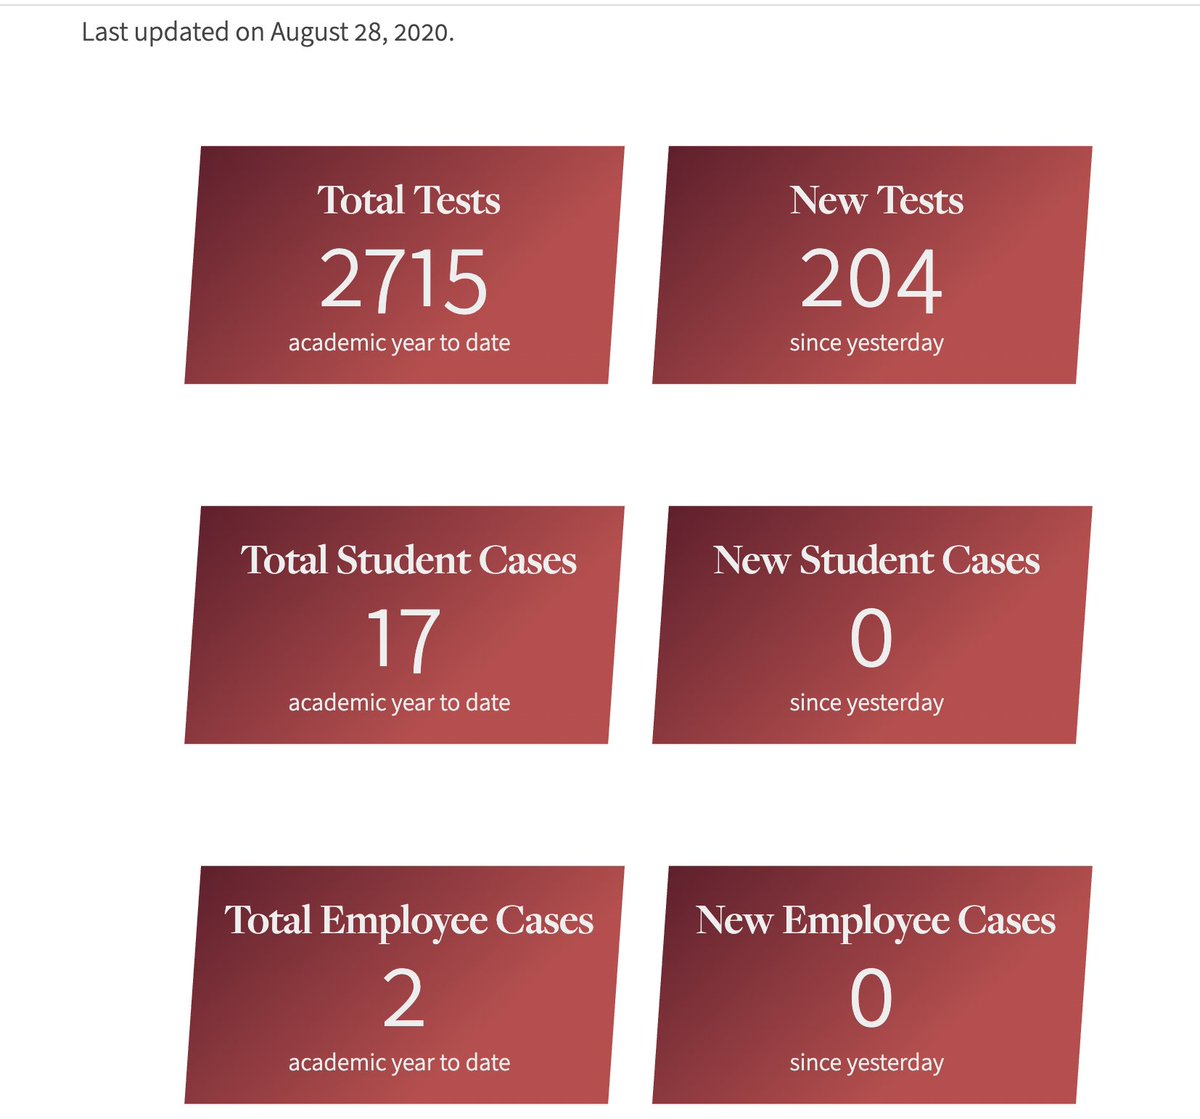  @Vassar is a small liberal arts college, led by a Public Health expert,  @ehbvassar, and has done a great job, with simple design, of presenting relevant data.  https://www.vassar.edu/together/dashboard/ 5/8